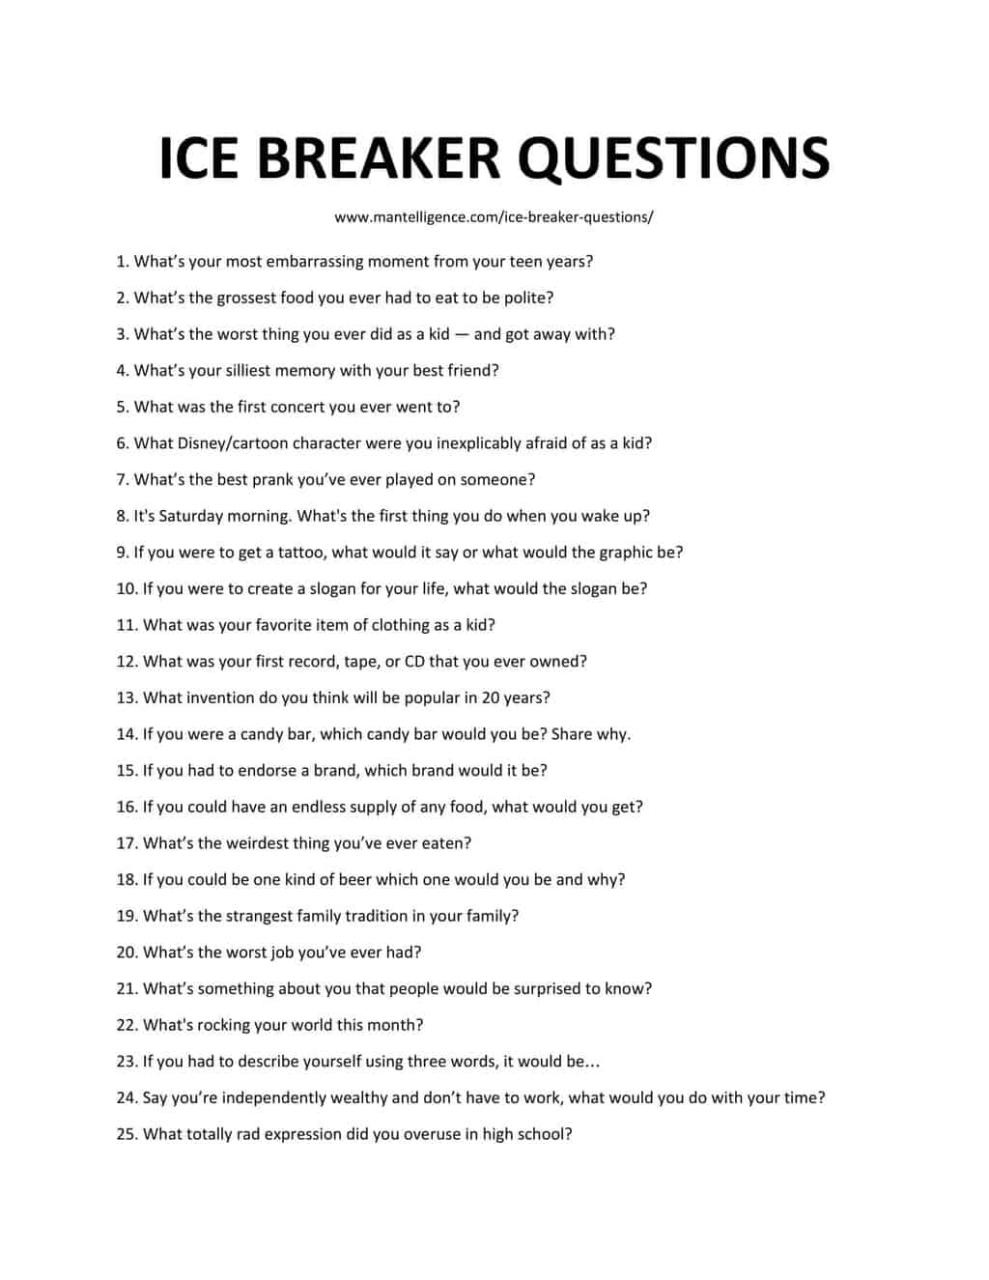 Dating ice breaker questions Fifty Great Speed Dating Questions. 2019